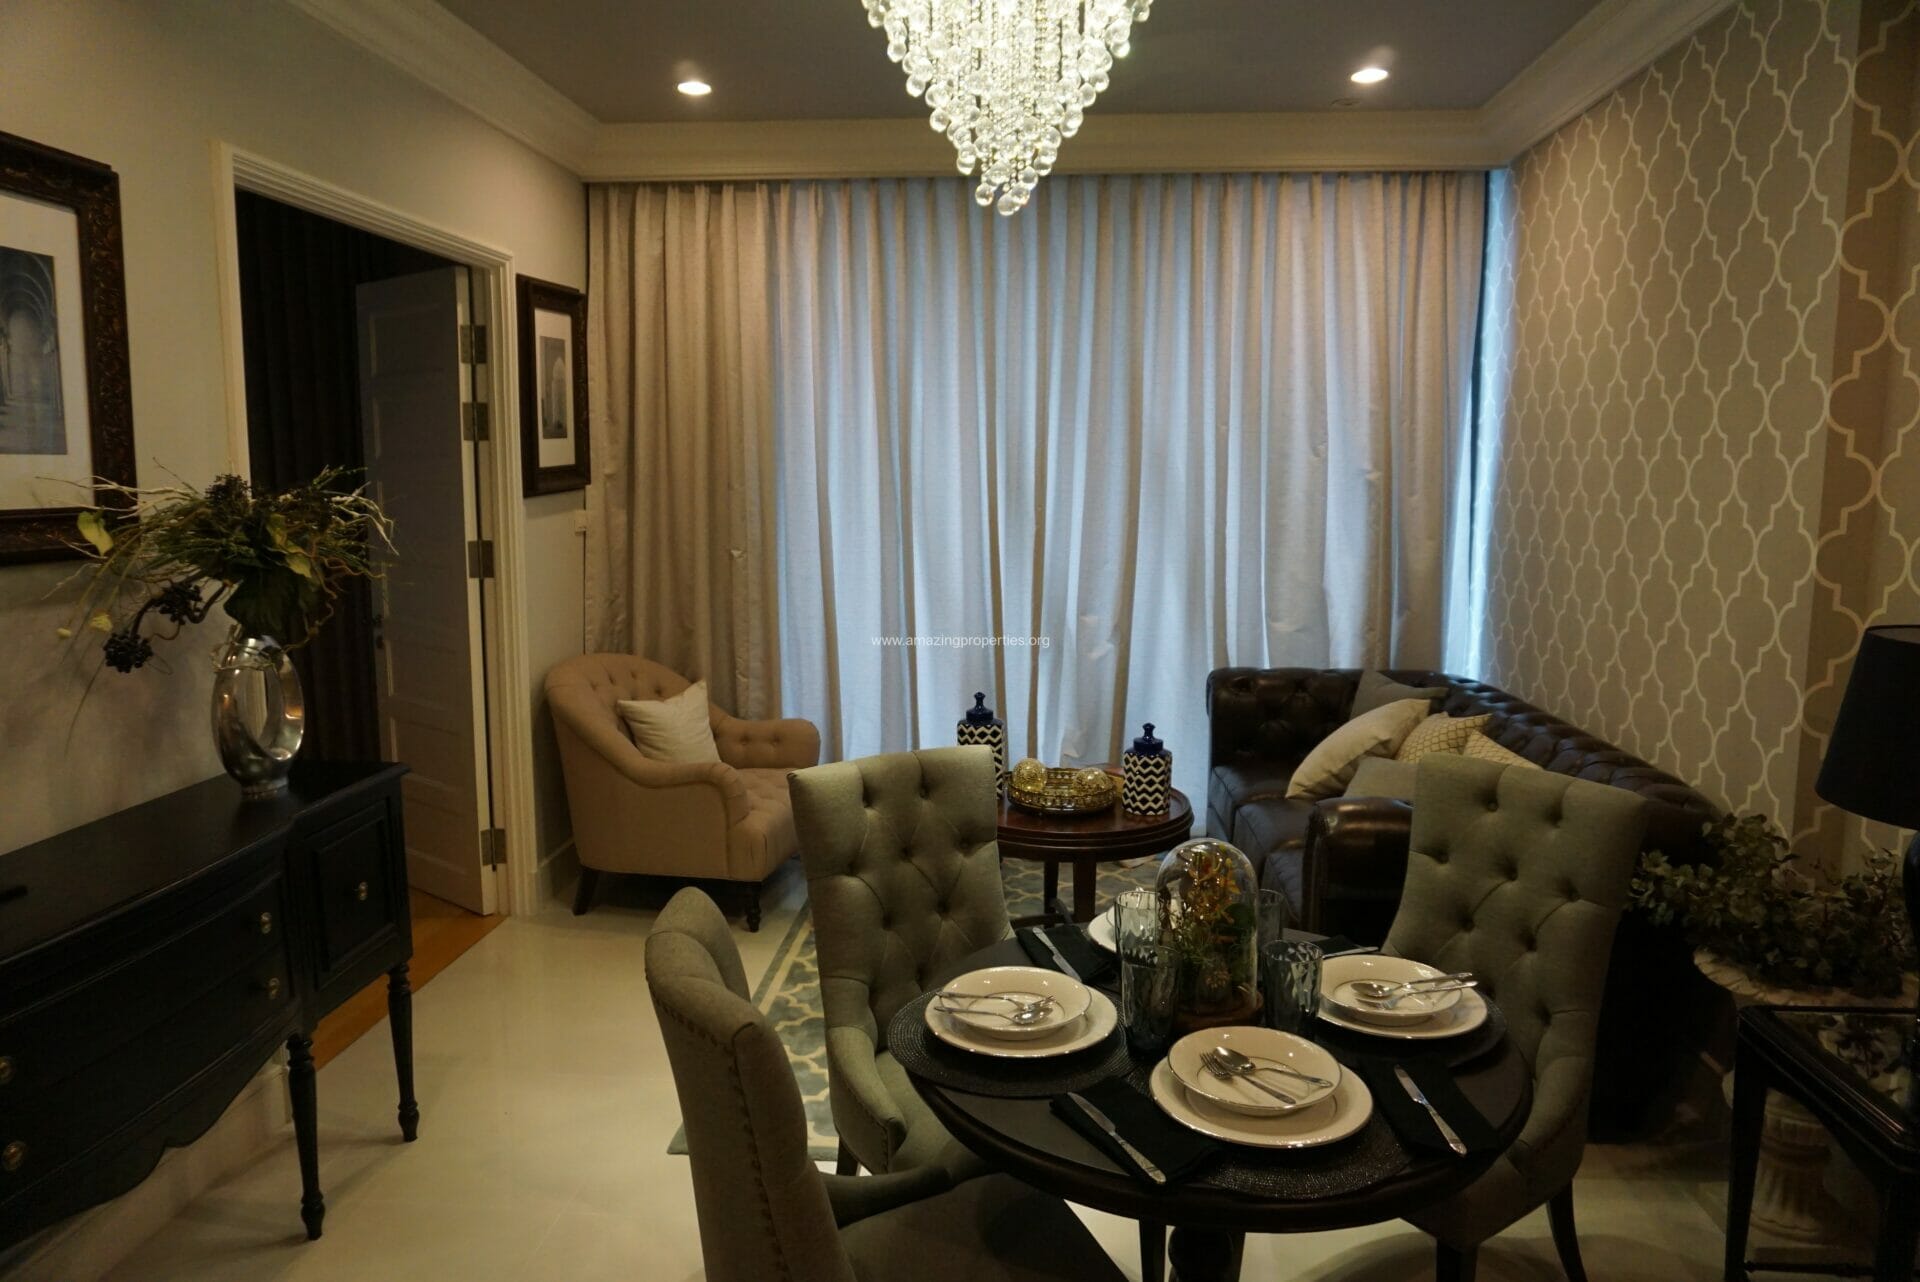 Aguston 1 Bedroom condo for Rent